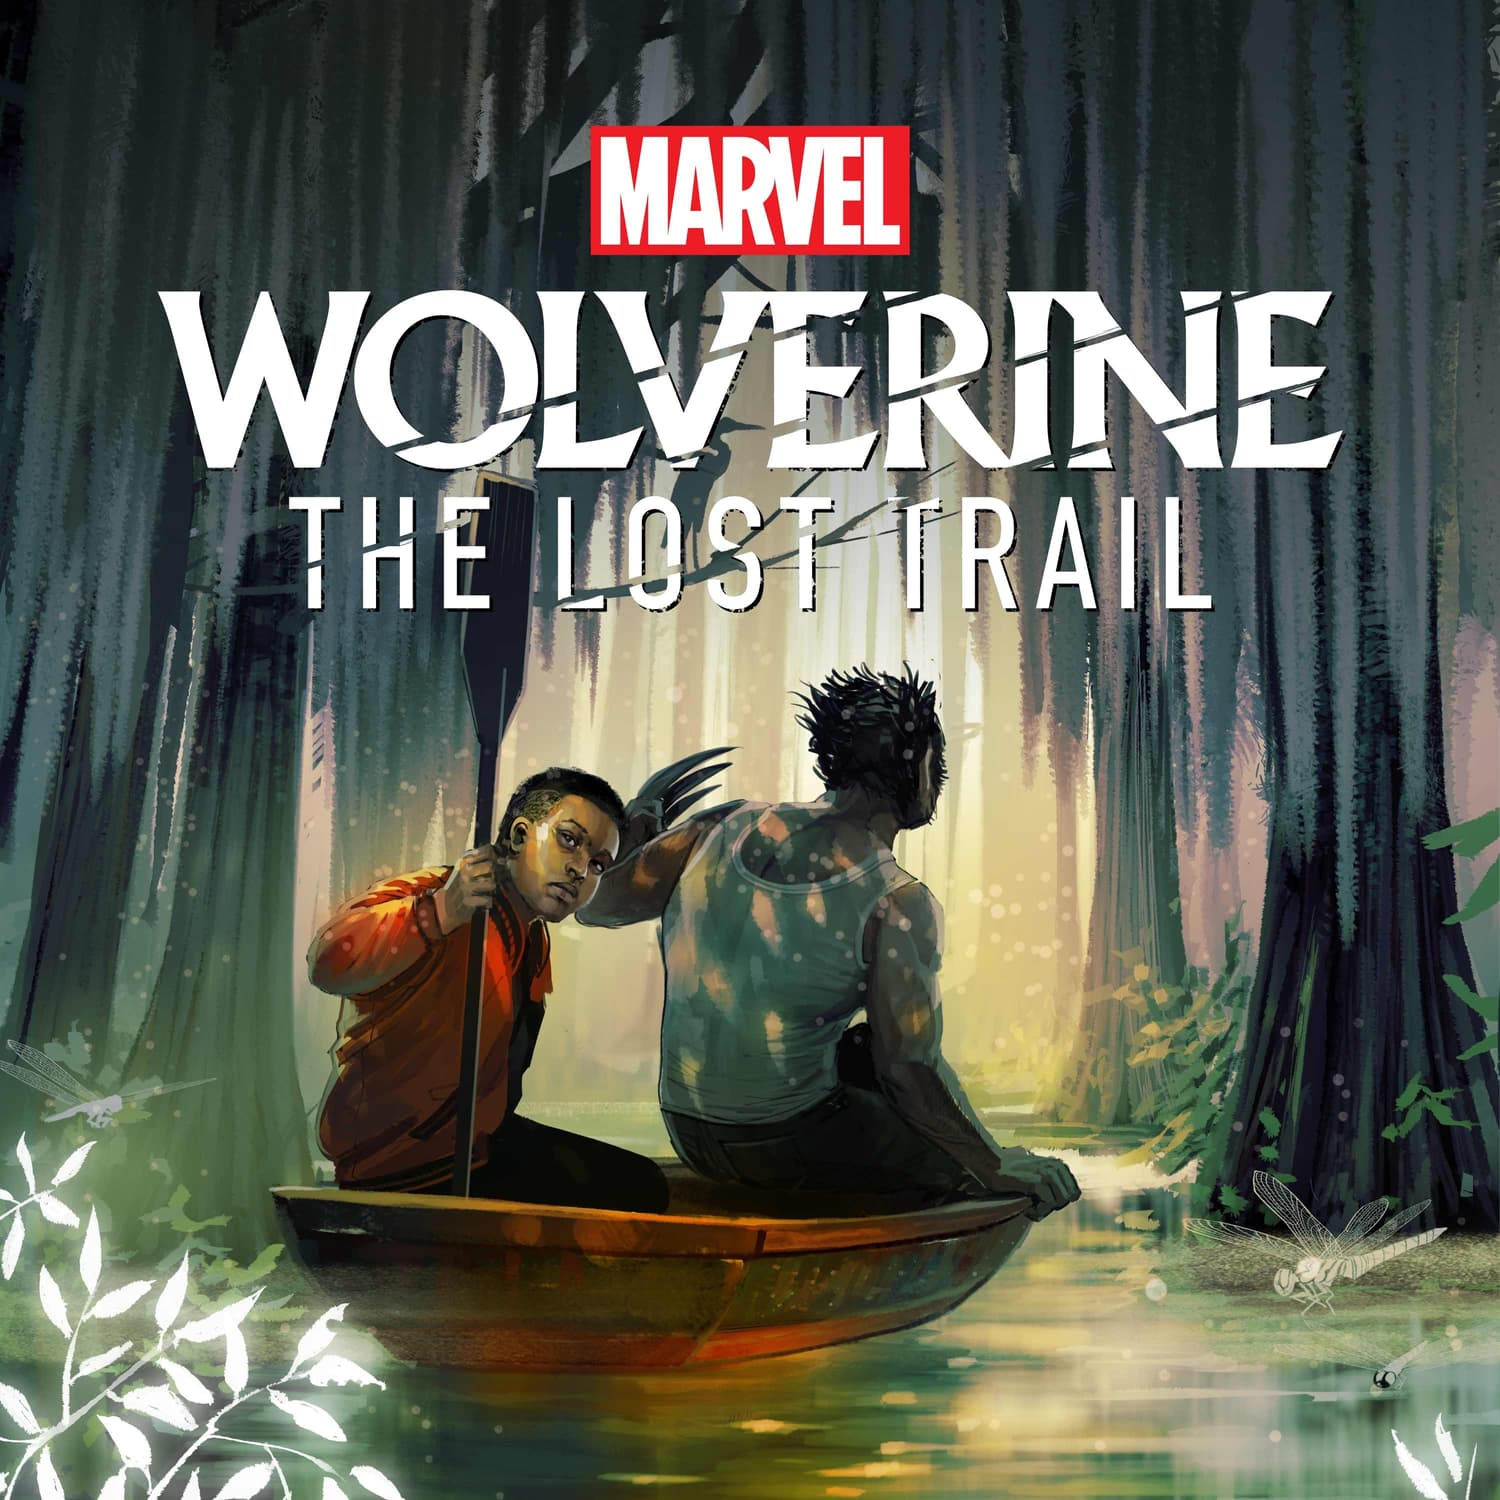 “MARVEL’S WOLVERINE: THE LOST TRAIL.”